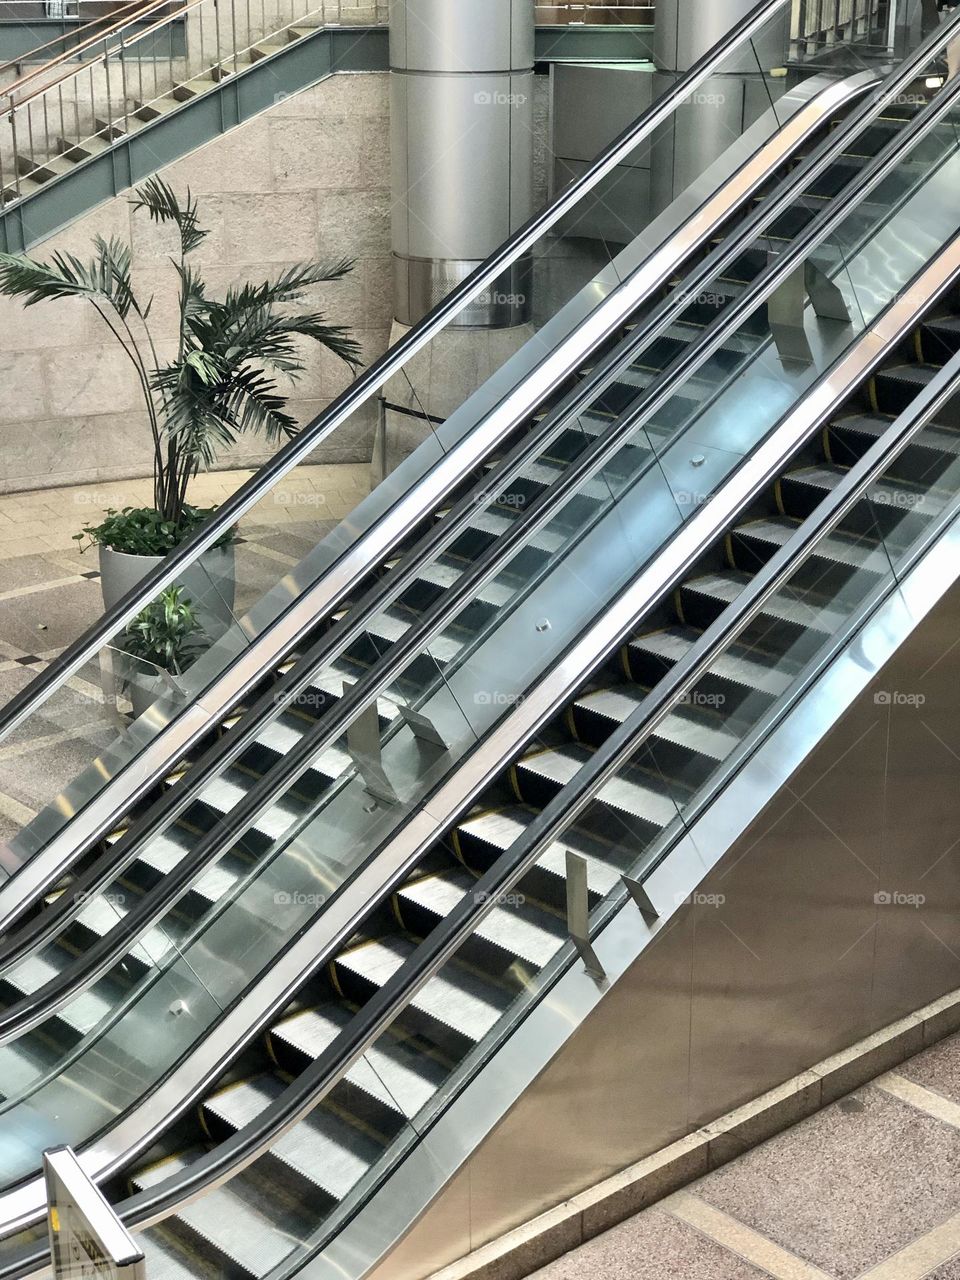 Escalators are essentially motorized staircases that are powered by electricity. An escalator features multiple steps in a row, ascending in succession at an incline. This was shot on iphone in South Station Bus Terminal in Boston. 